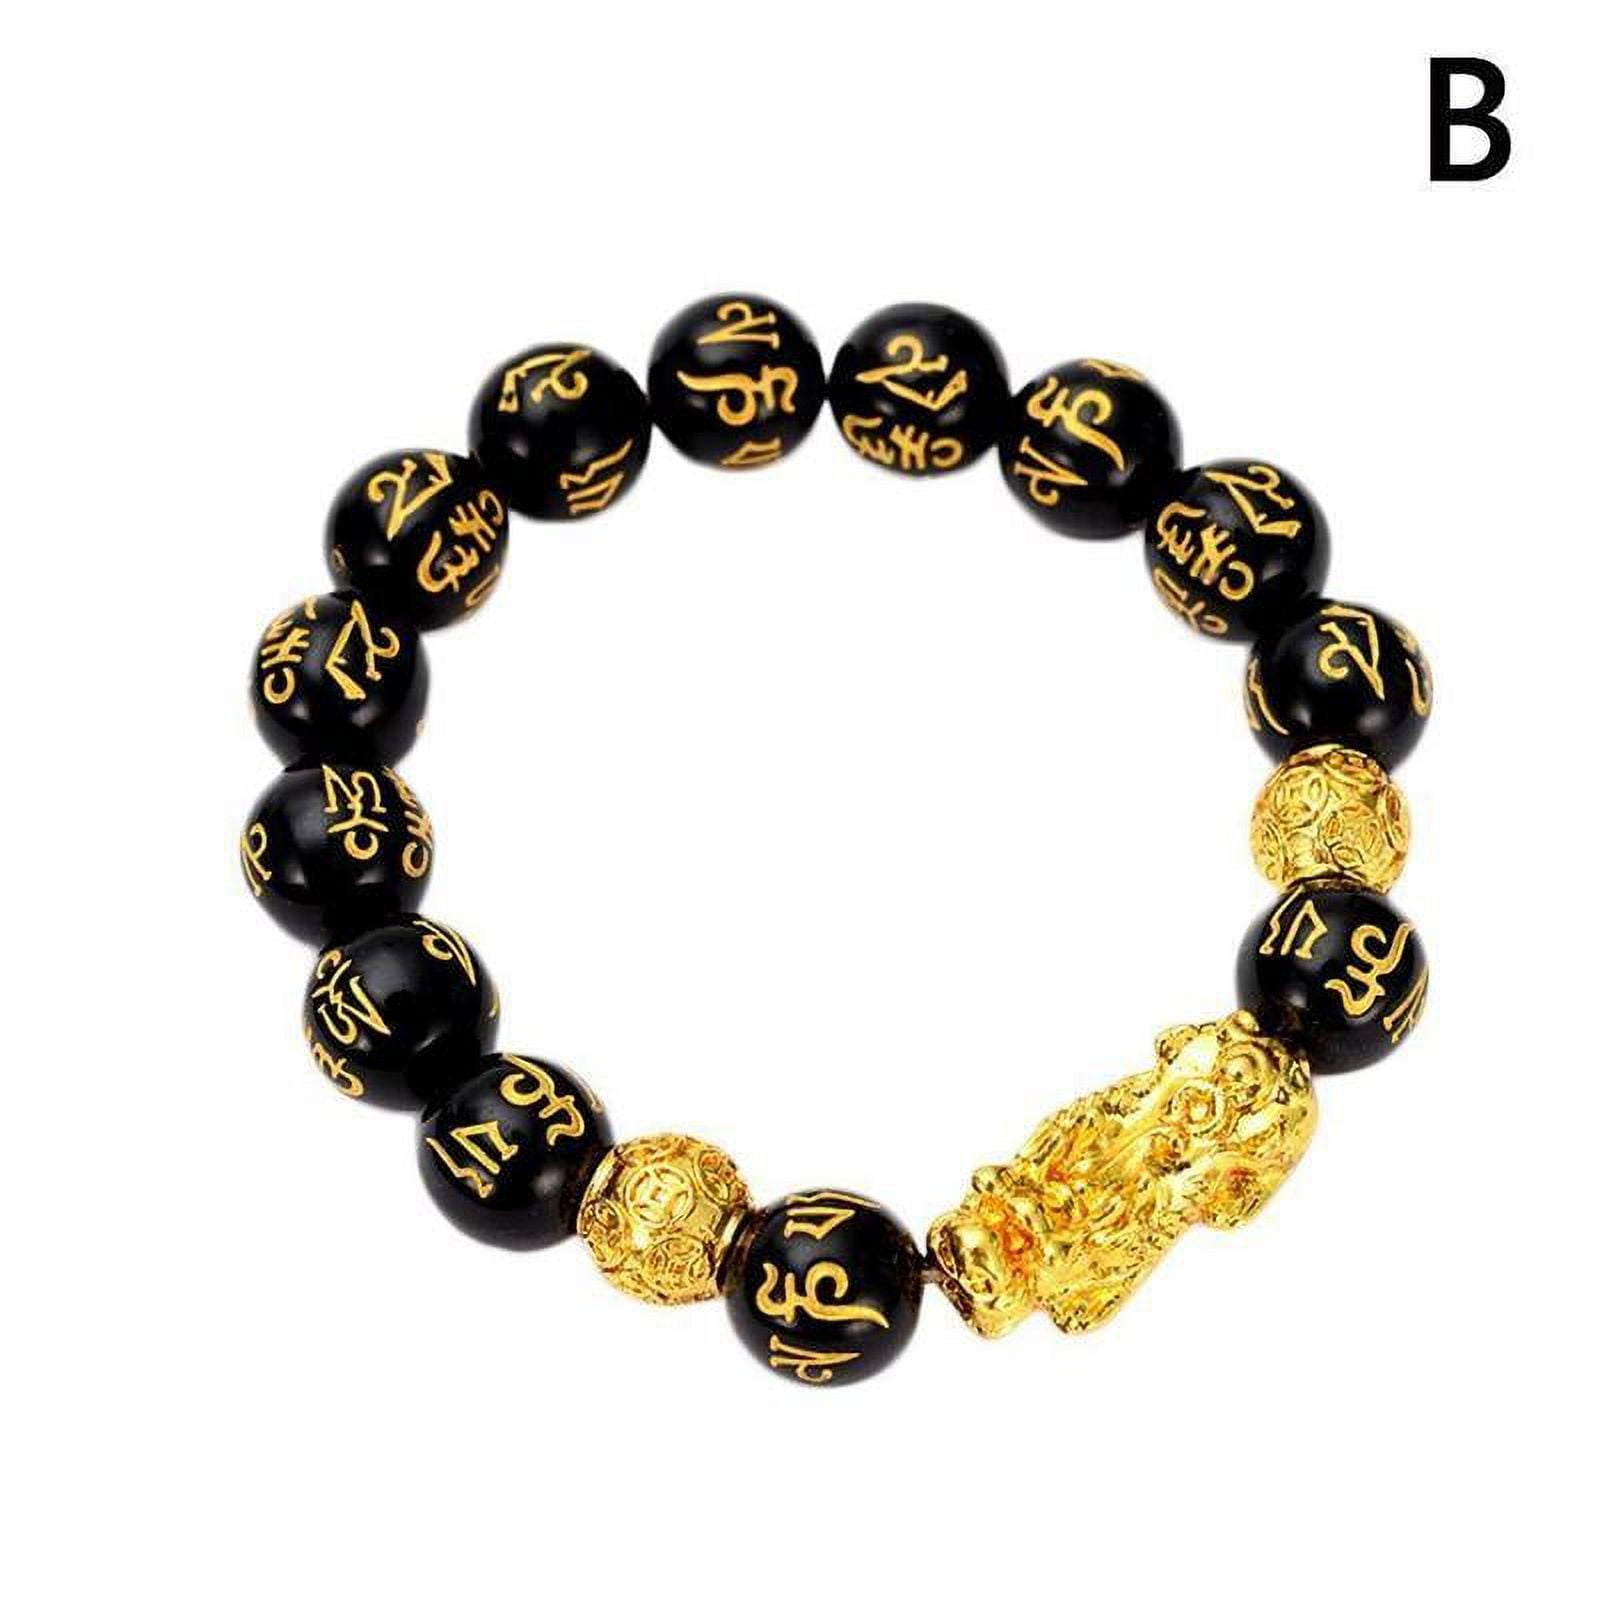 Feng Shui Handmade Pi Yao Pi Xiu Bracelet Amulet for Protection and Wealth  